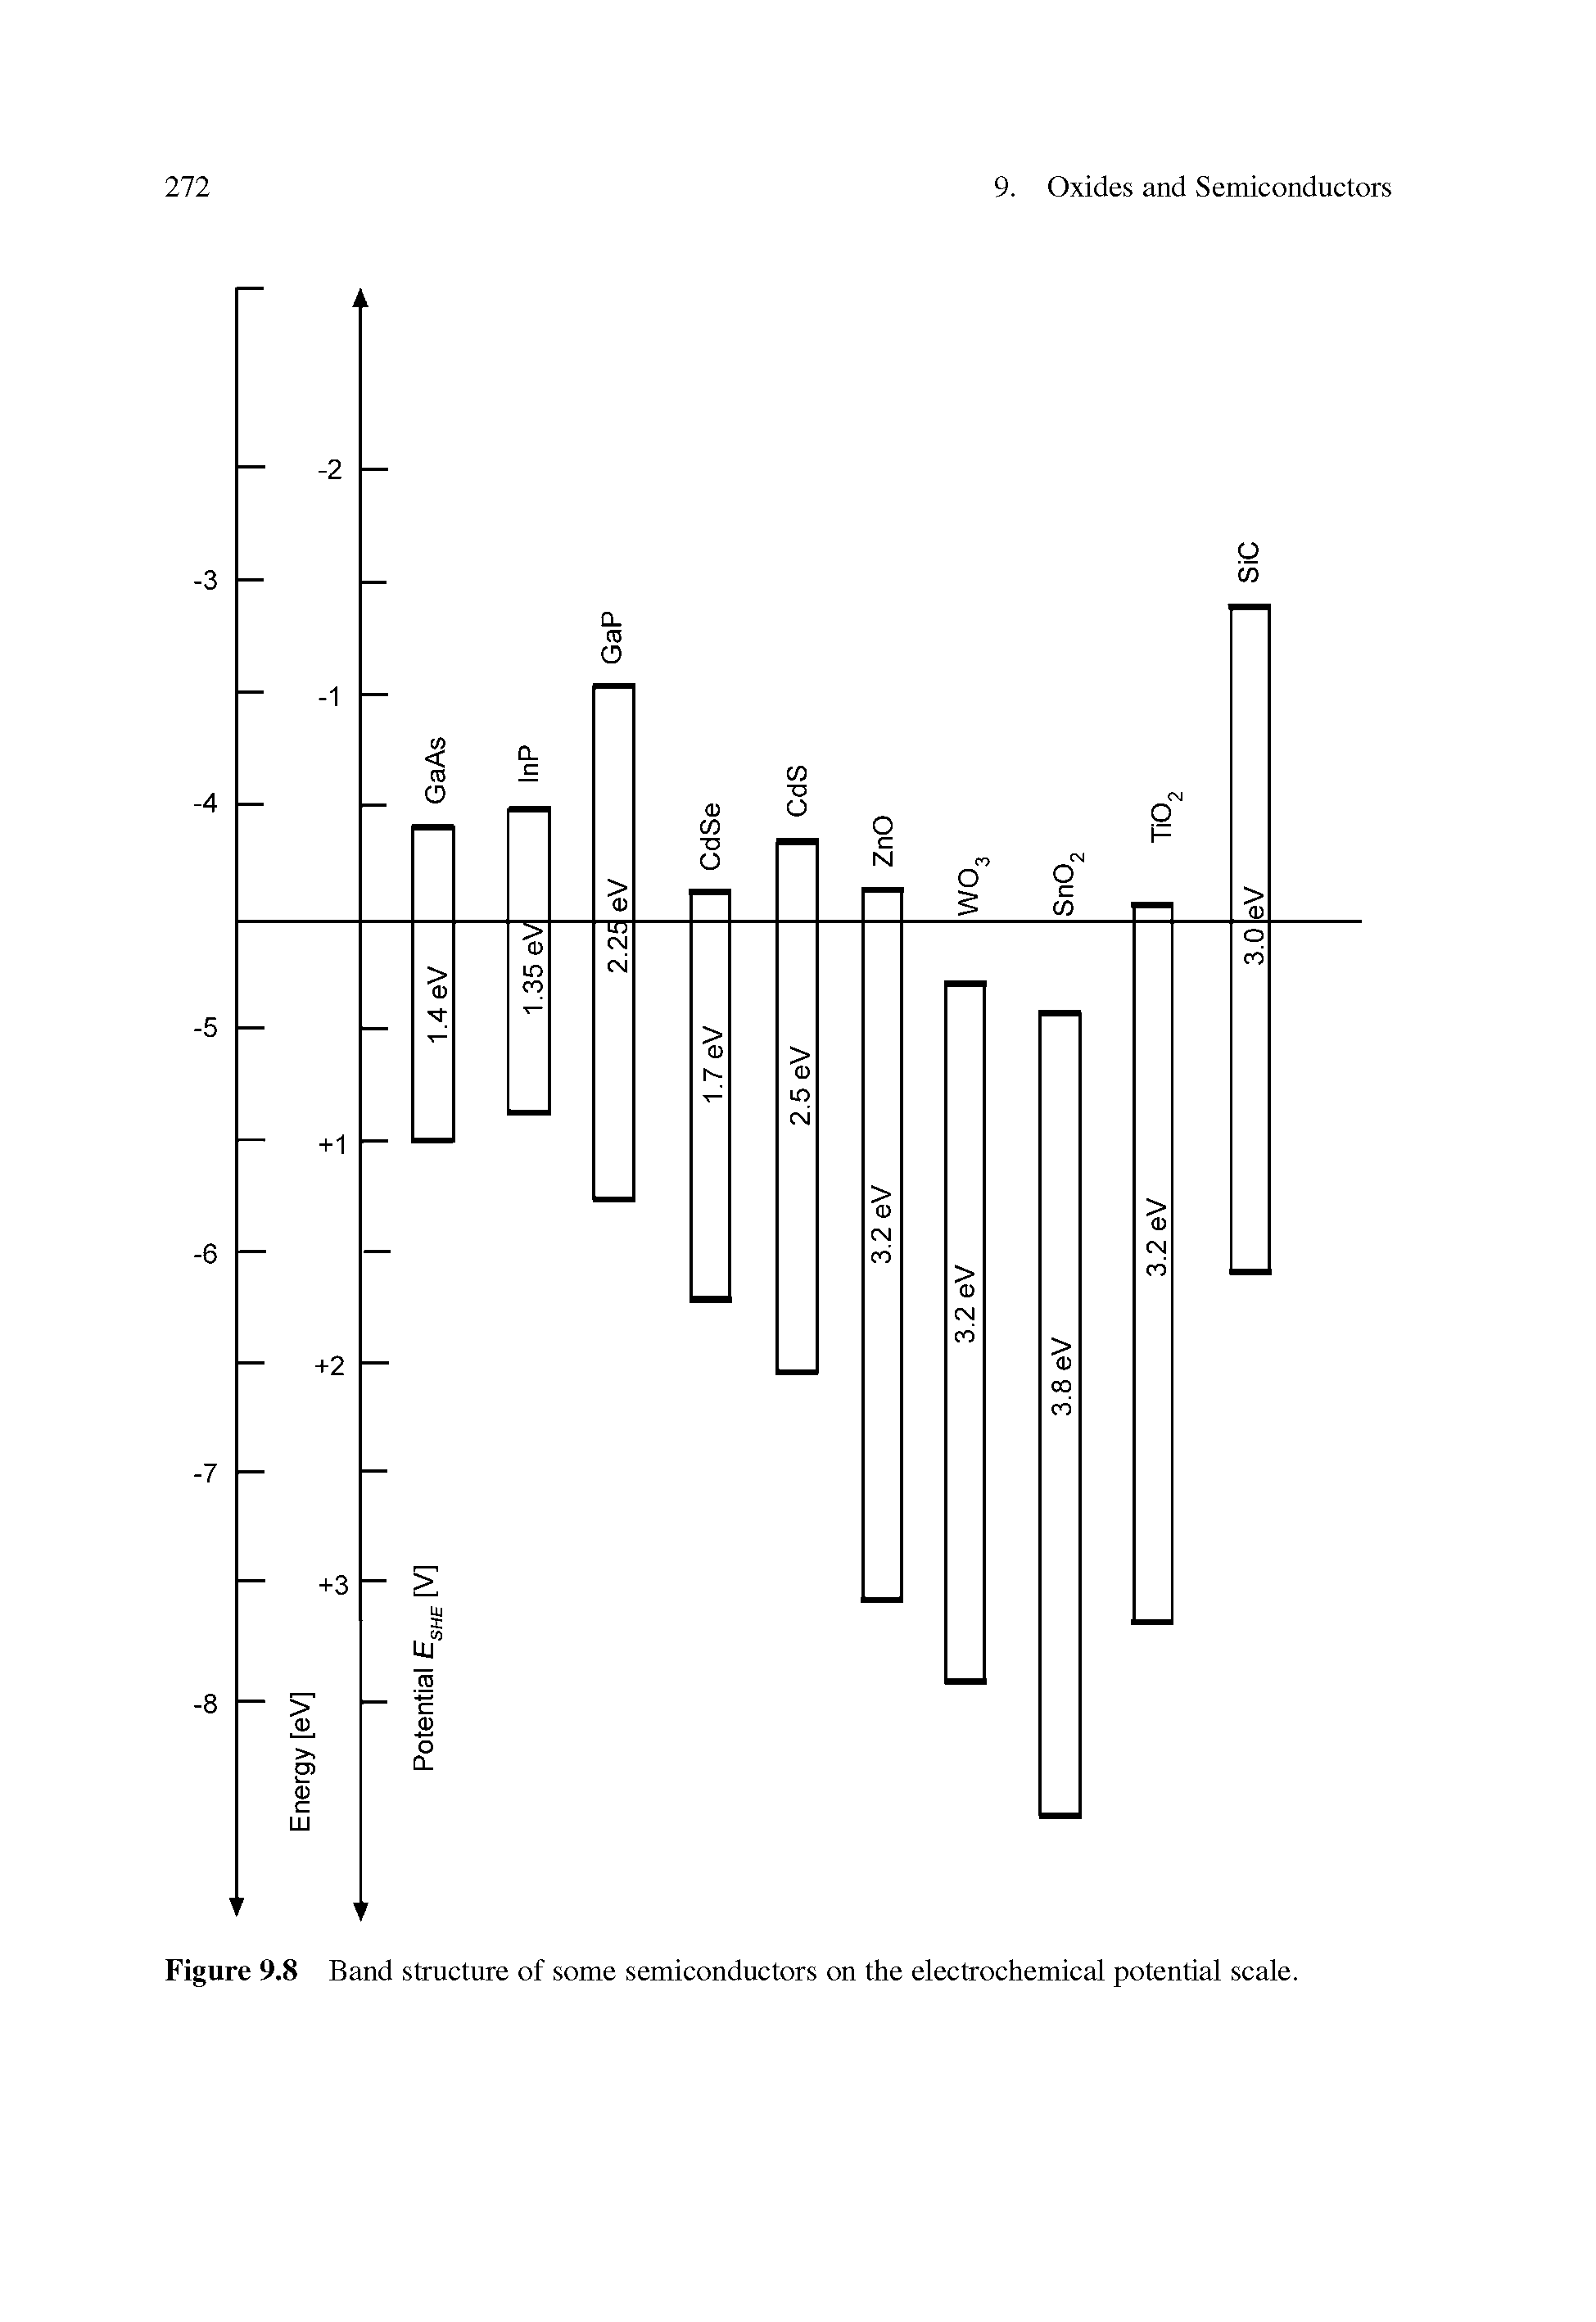 Figure 9.8 Band structure of some semiconductors on the electrochemical potential scale.